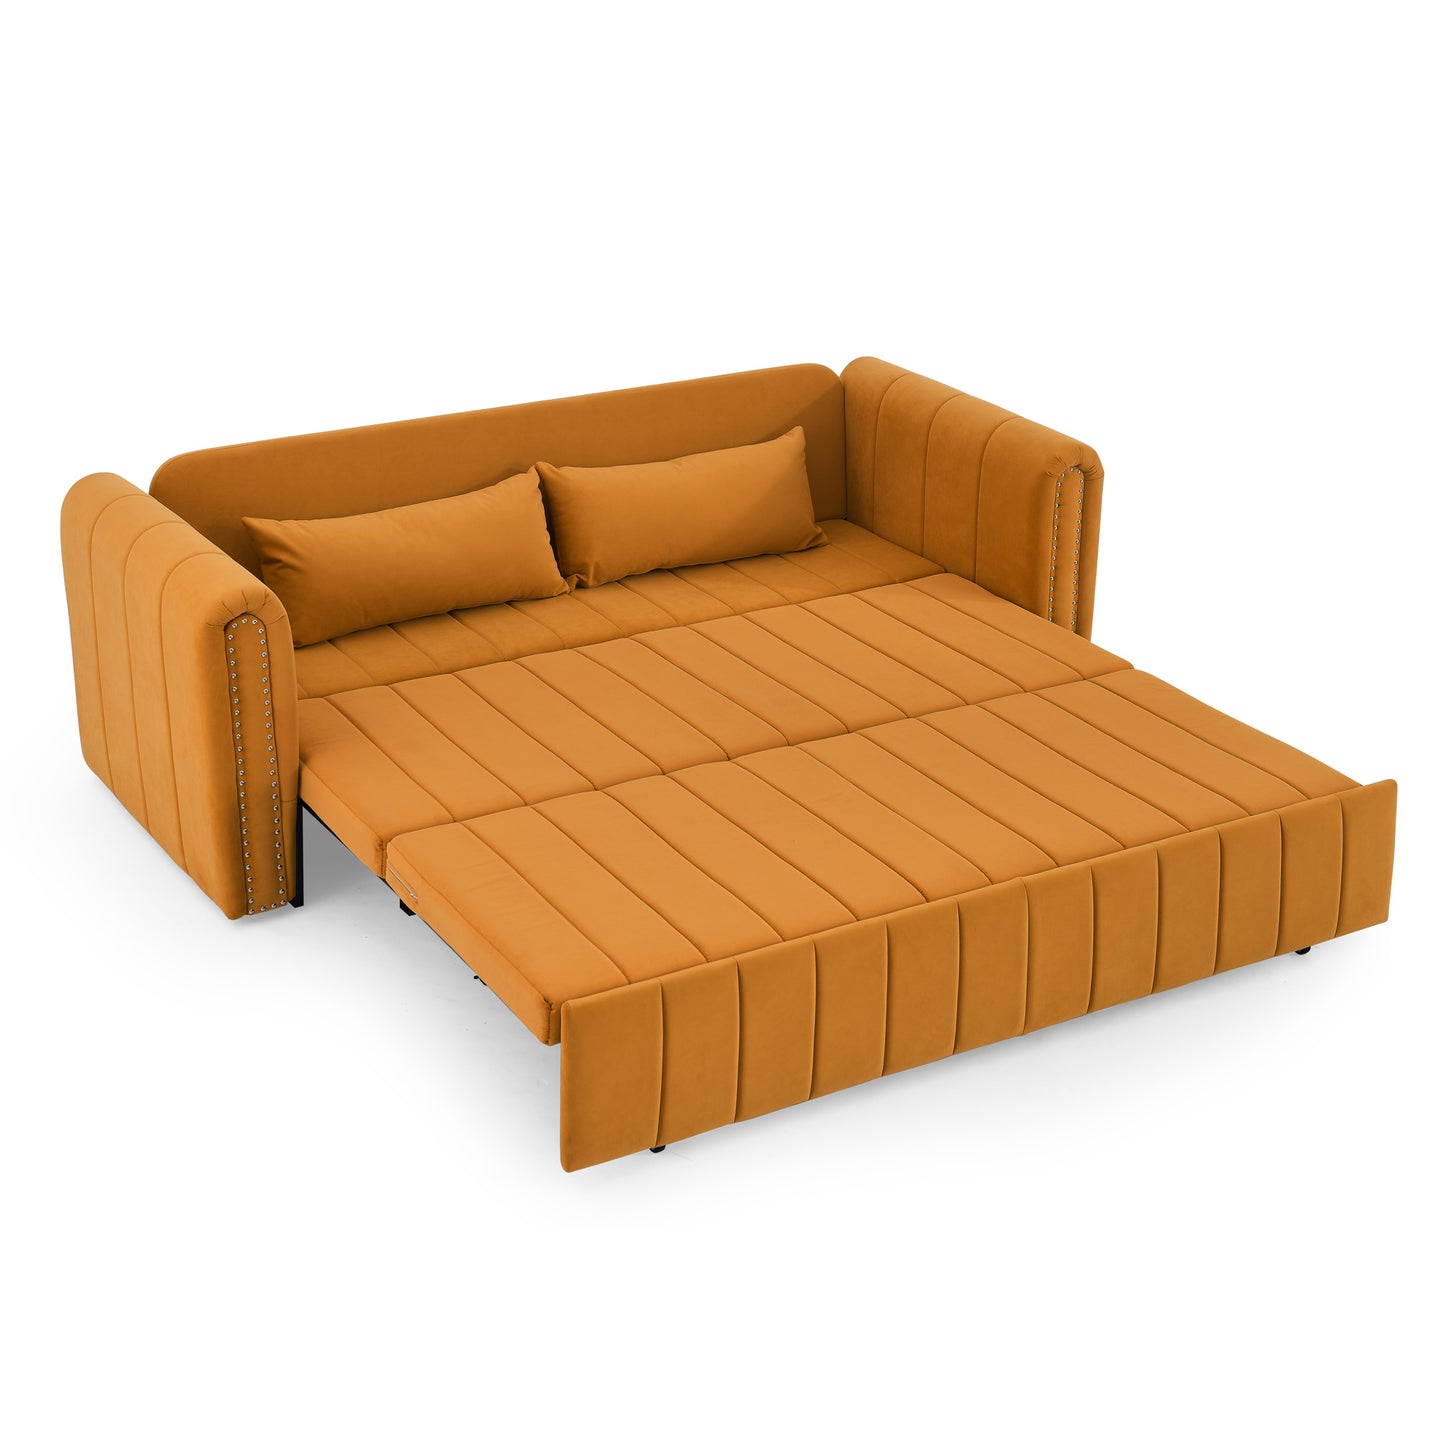 3 in 1 Pull-Out Bed Sleeper, Modern Upholstered 3 Seats Lounge Sofa & Couches with Rolled Arms Decorated with Copper Nails , Convertible Futon 3 Seats Sofabed with Two Drawers and Two Pillows